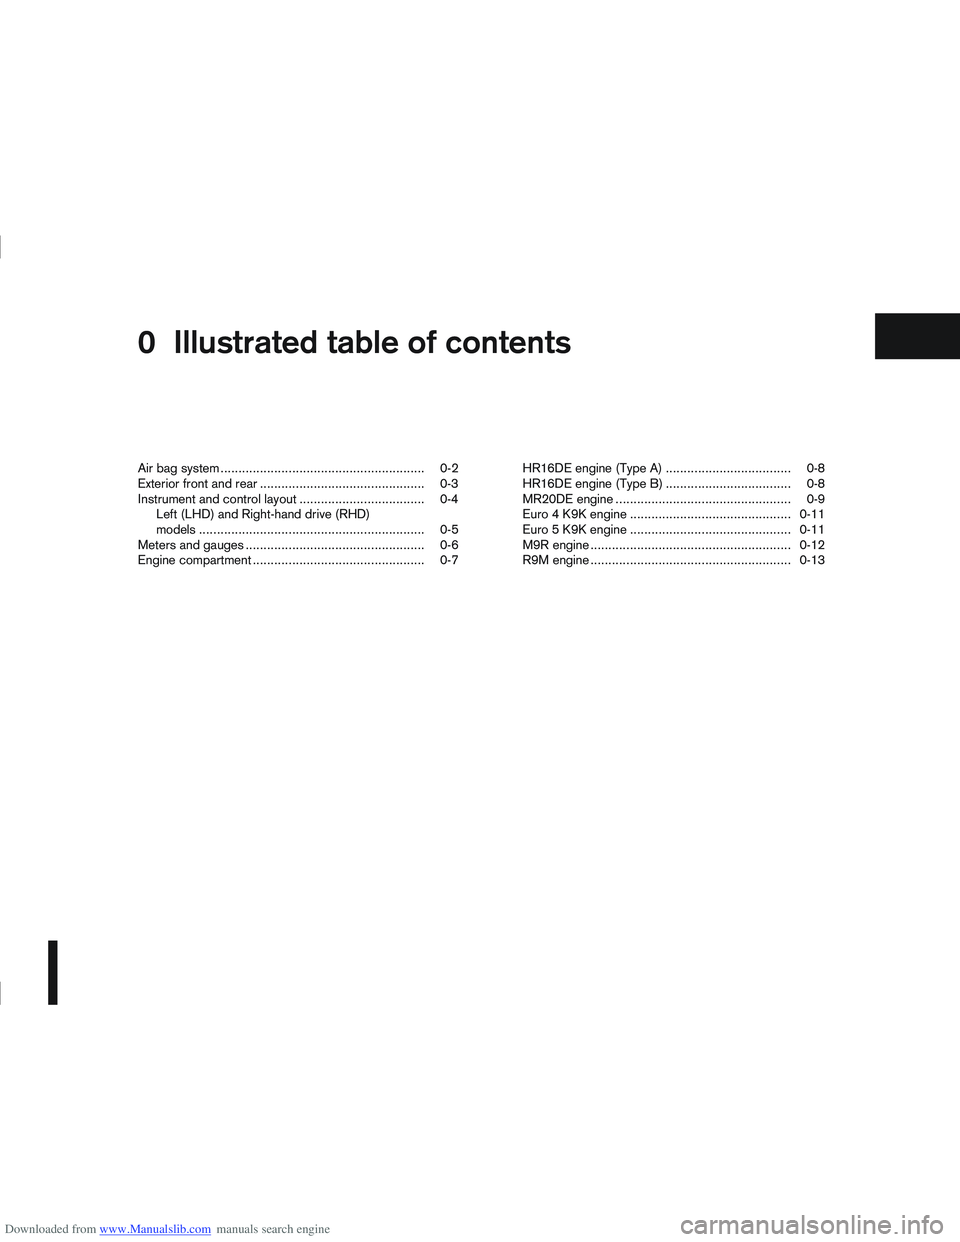 NISSAN QASHQAI 2010  Owners Manual Downloaded from www.Manualslib.com manuals search engine 0Illustrated table of contents
Illustrated table of contents
Air bag system ......................................................... 0-2
Exter